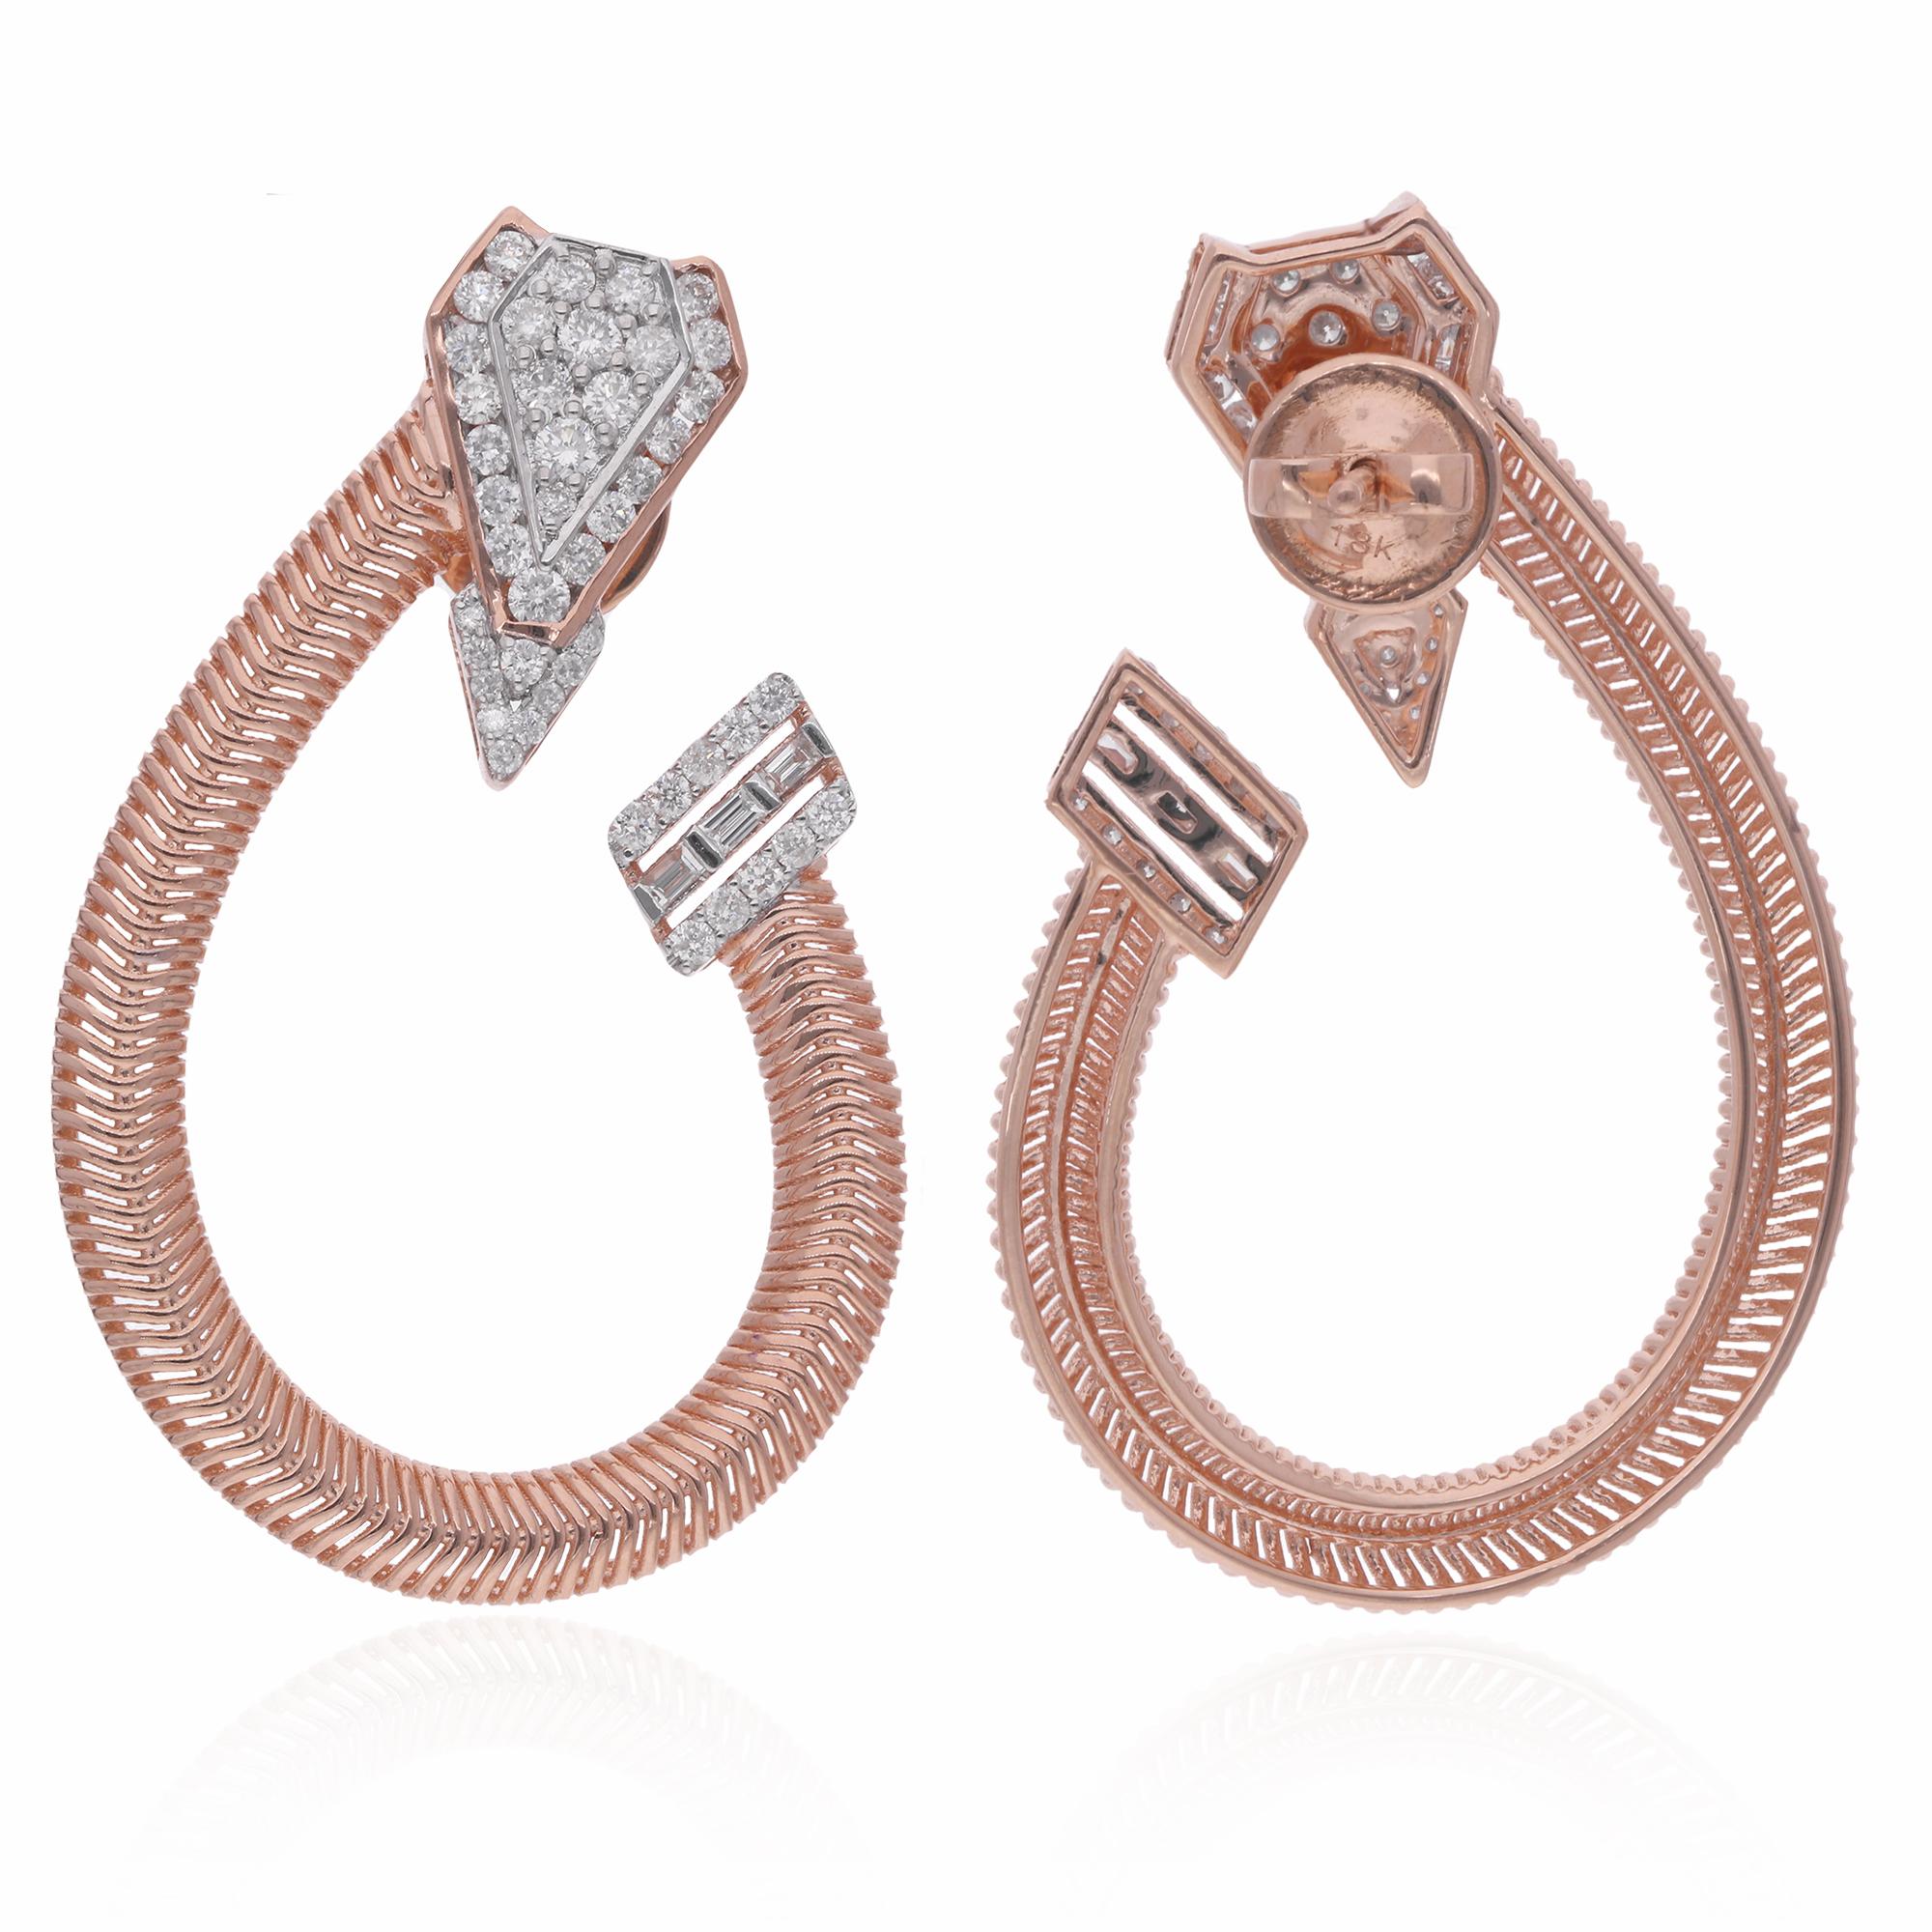 Indulge in the luxurious allure of these Natural 1.07 Carat Baguette & Round Diamond Hoop Earrings, exquisitely crafted in 14 karat rose gold. Each earring features a captivating combination of baguette and round diamonds, meticulously arranged to